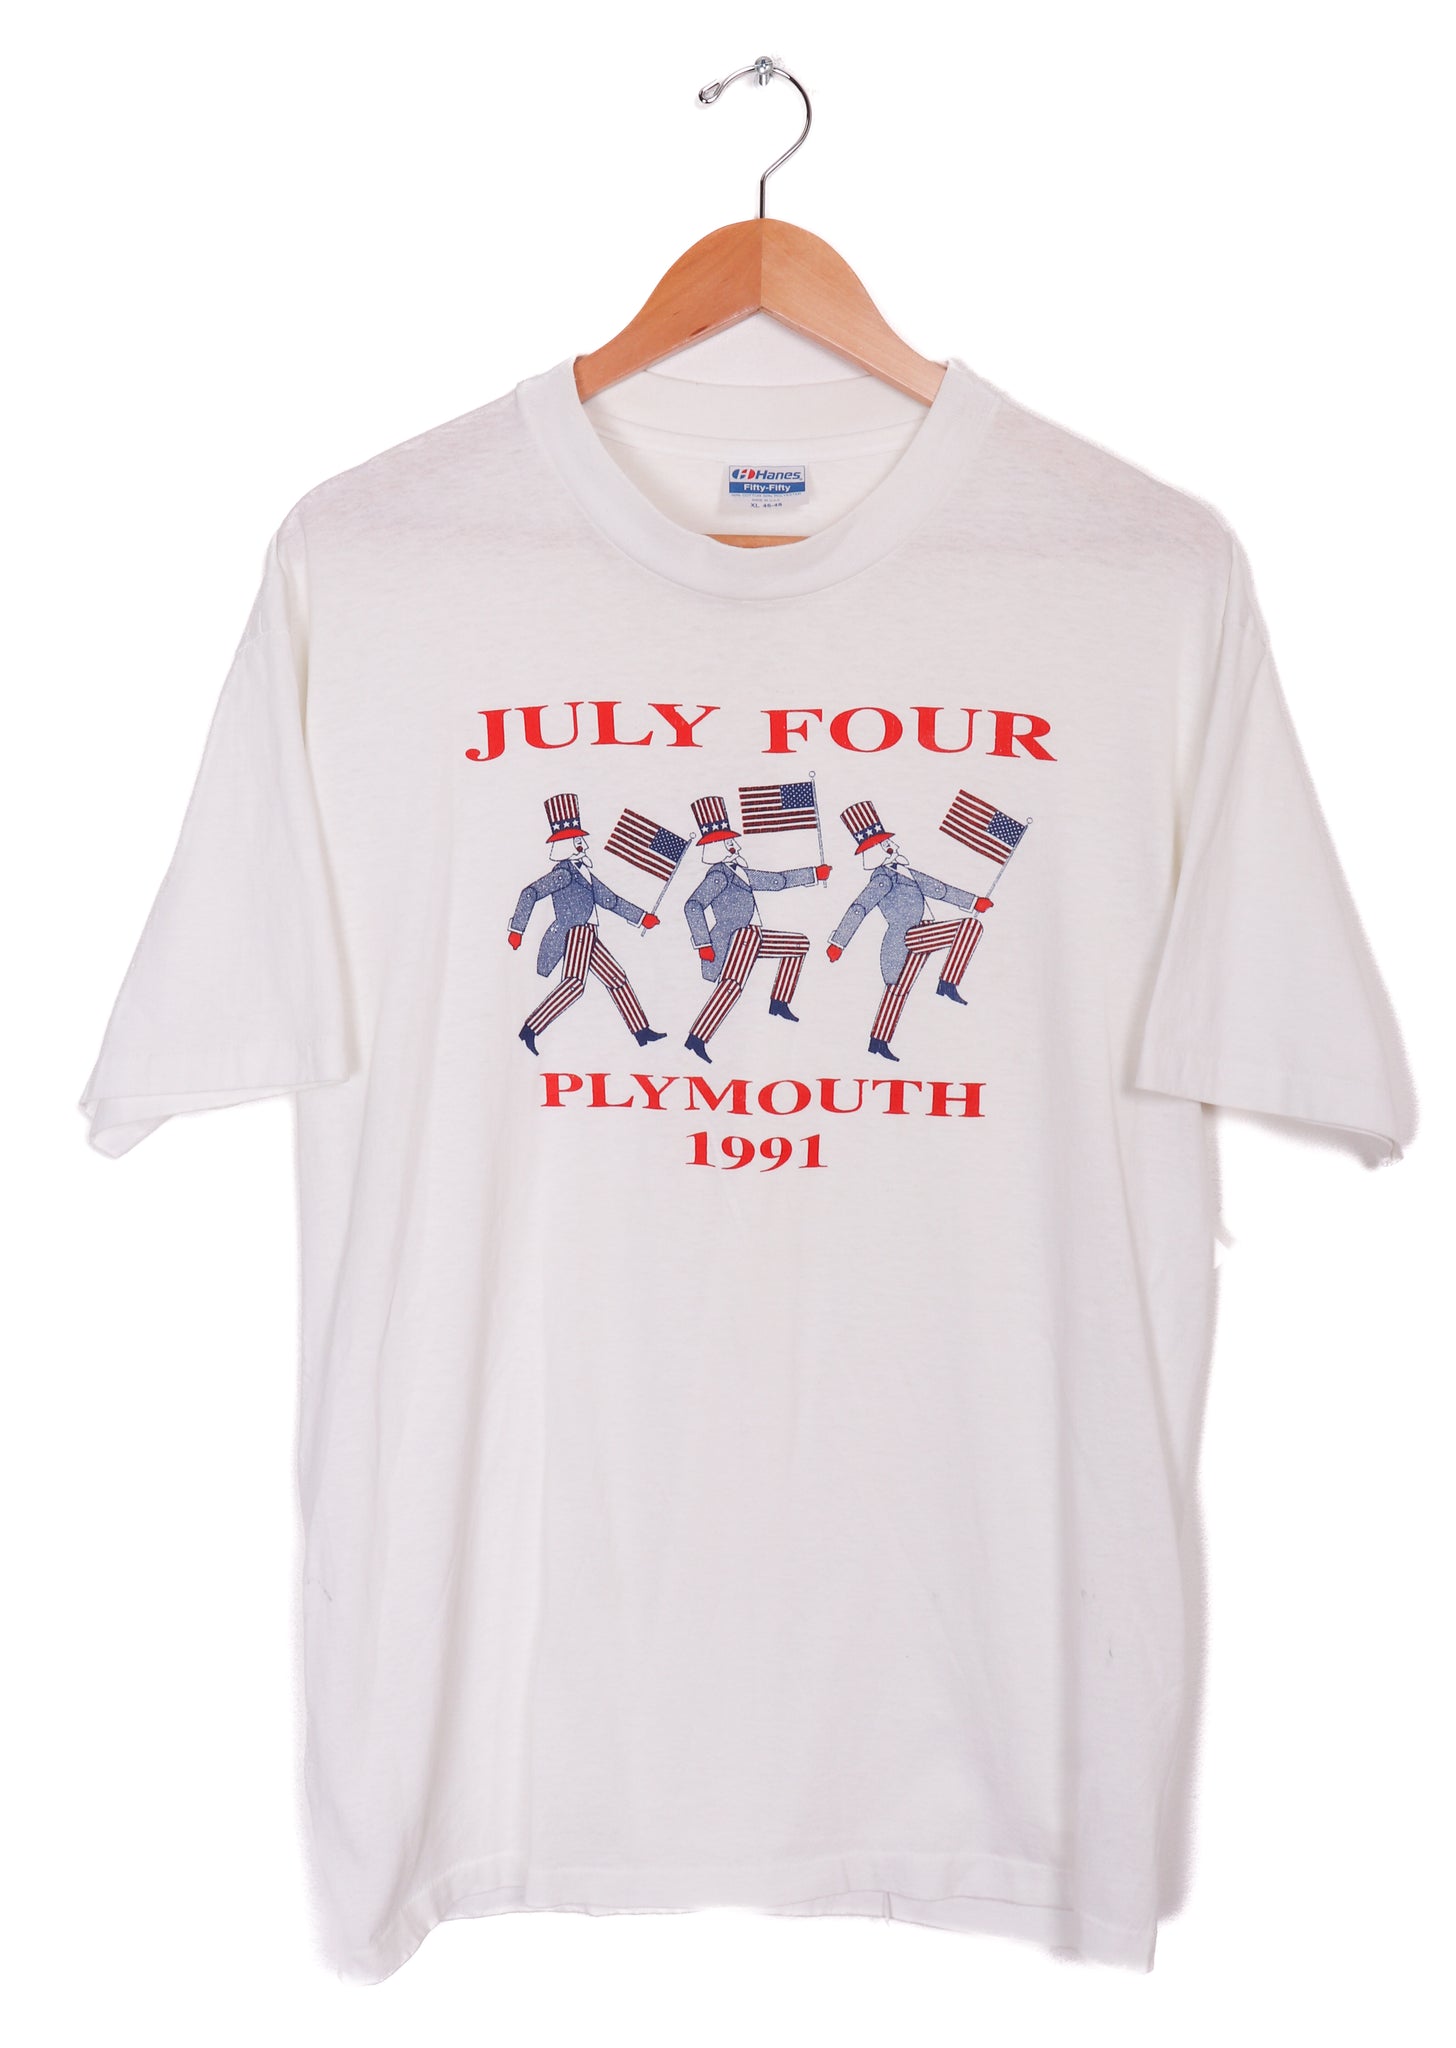 1991 July Fourth in Plymouth T-Shirt